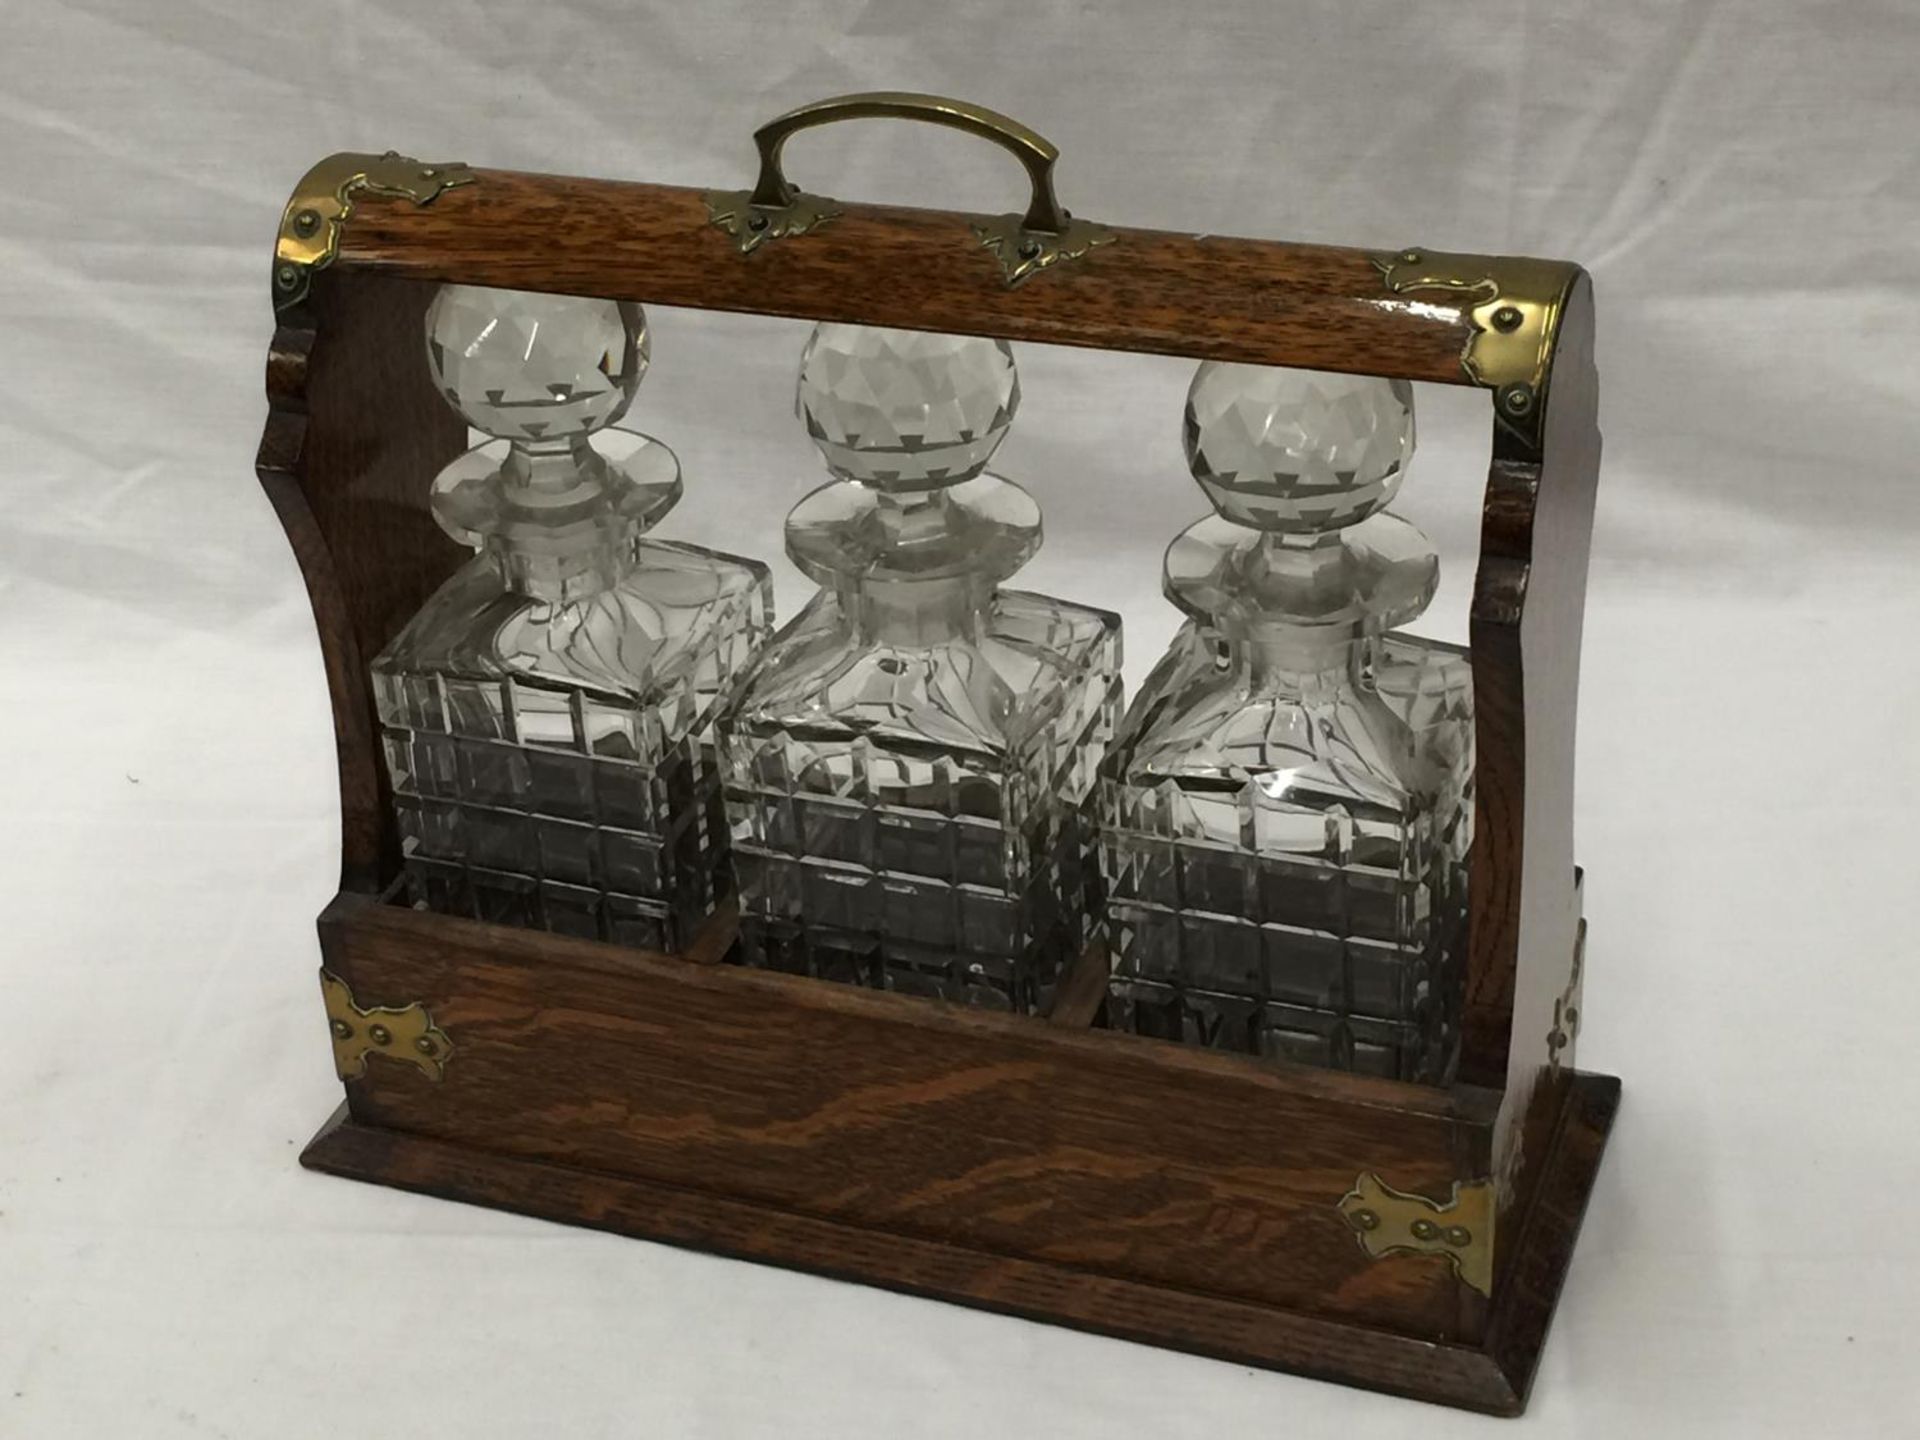 A VINTAGE MAHOGANY TANTALUS DECANTER SET WITH BRASS DETAILING AND A KEY - Image 7 of 9